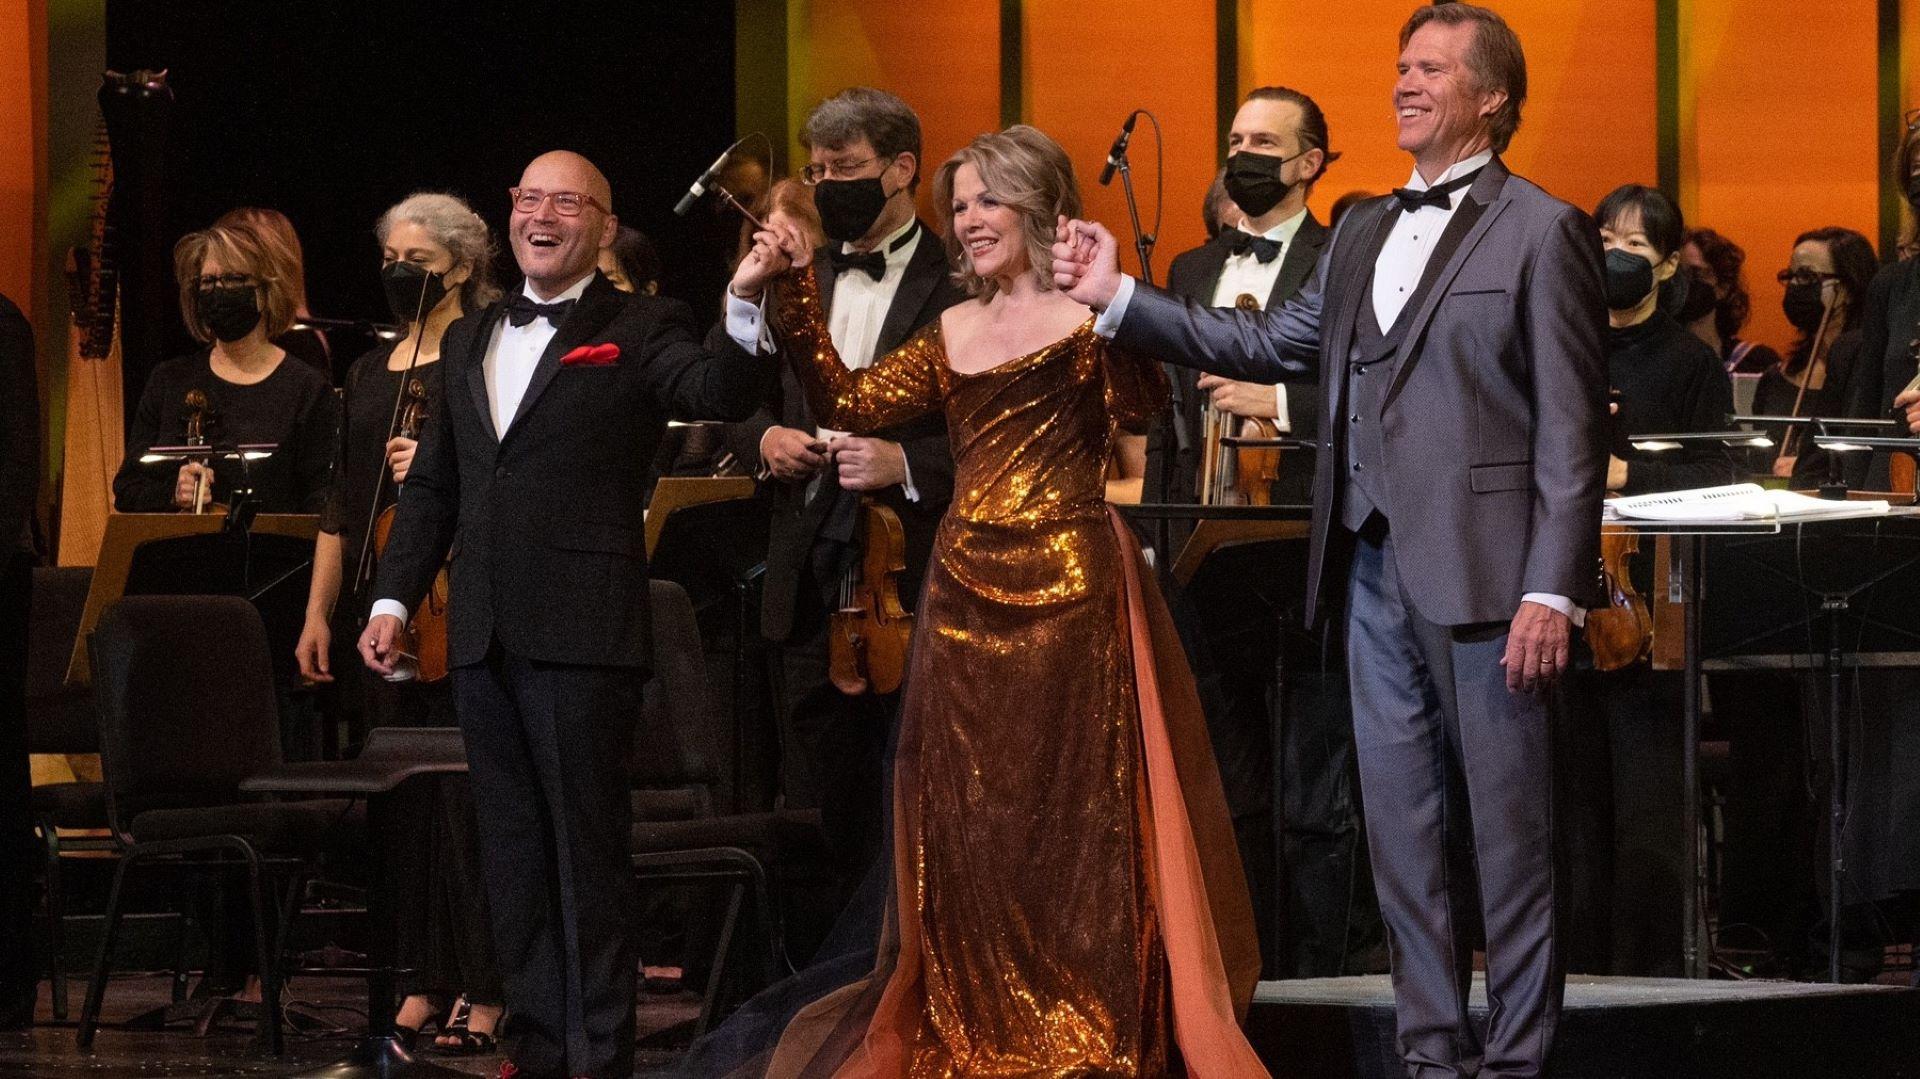 From left: Enrique Mazzola, Renee Fleming and Rod Gilfry. (Photo by Robert Kusel)